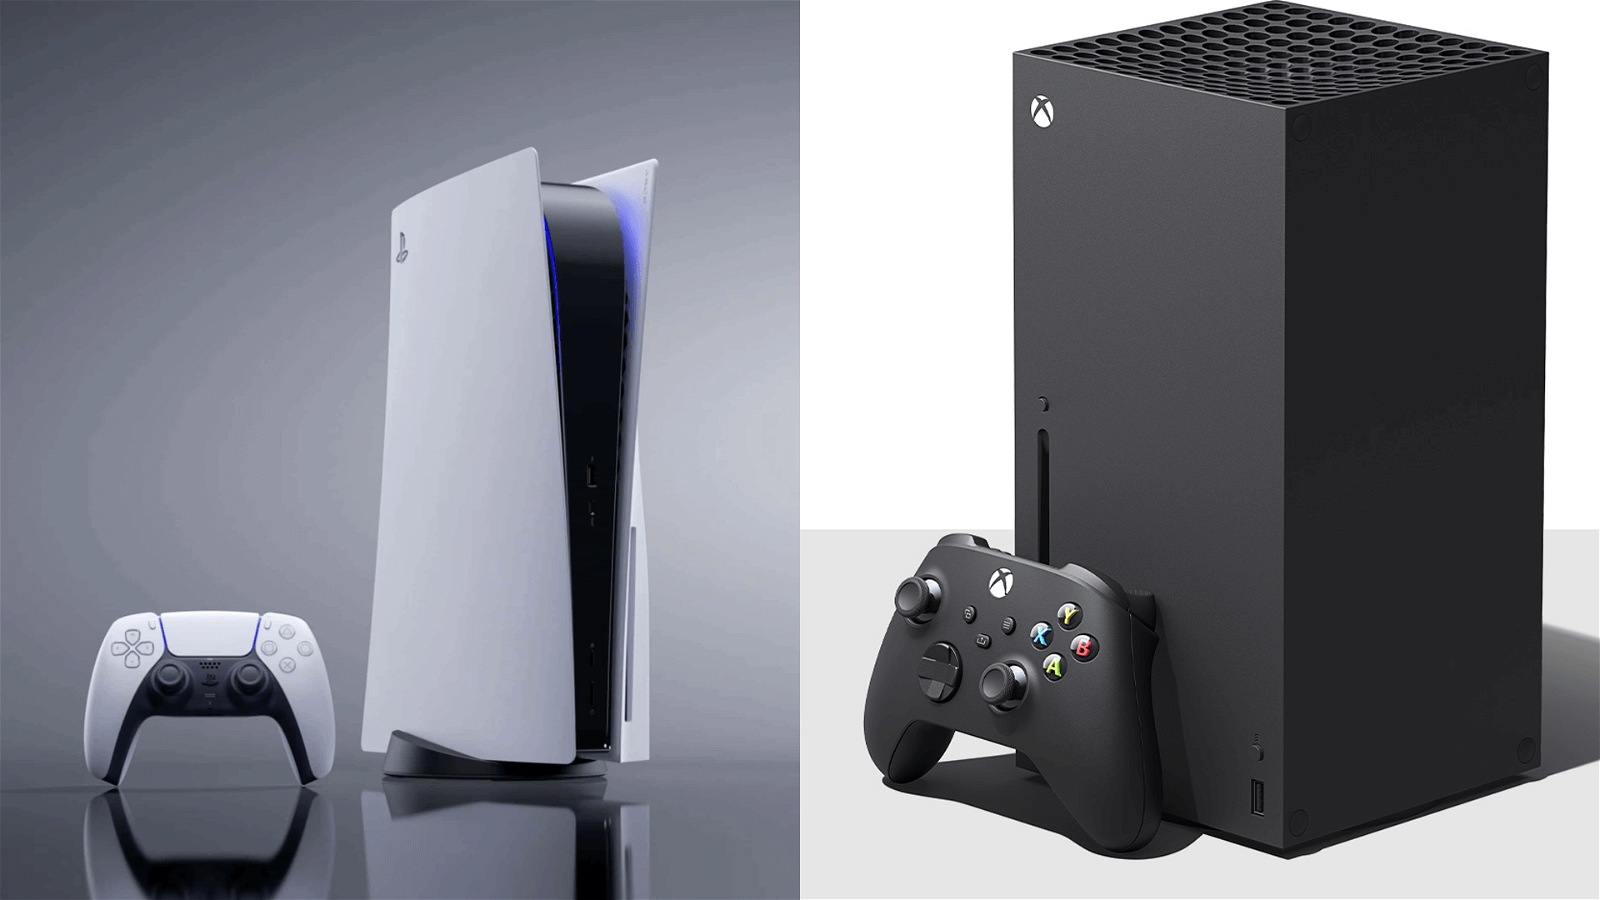 Console Wars Between Xbox And PlayStation Since Decades